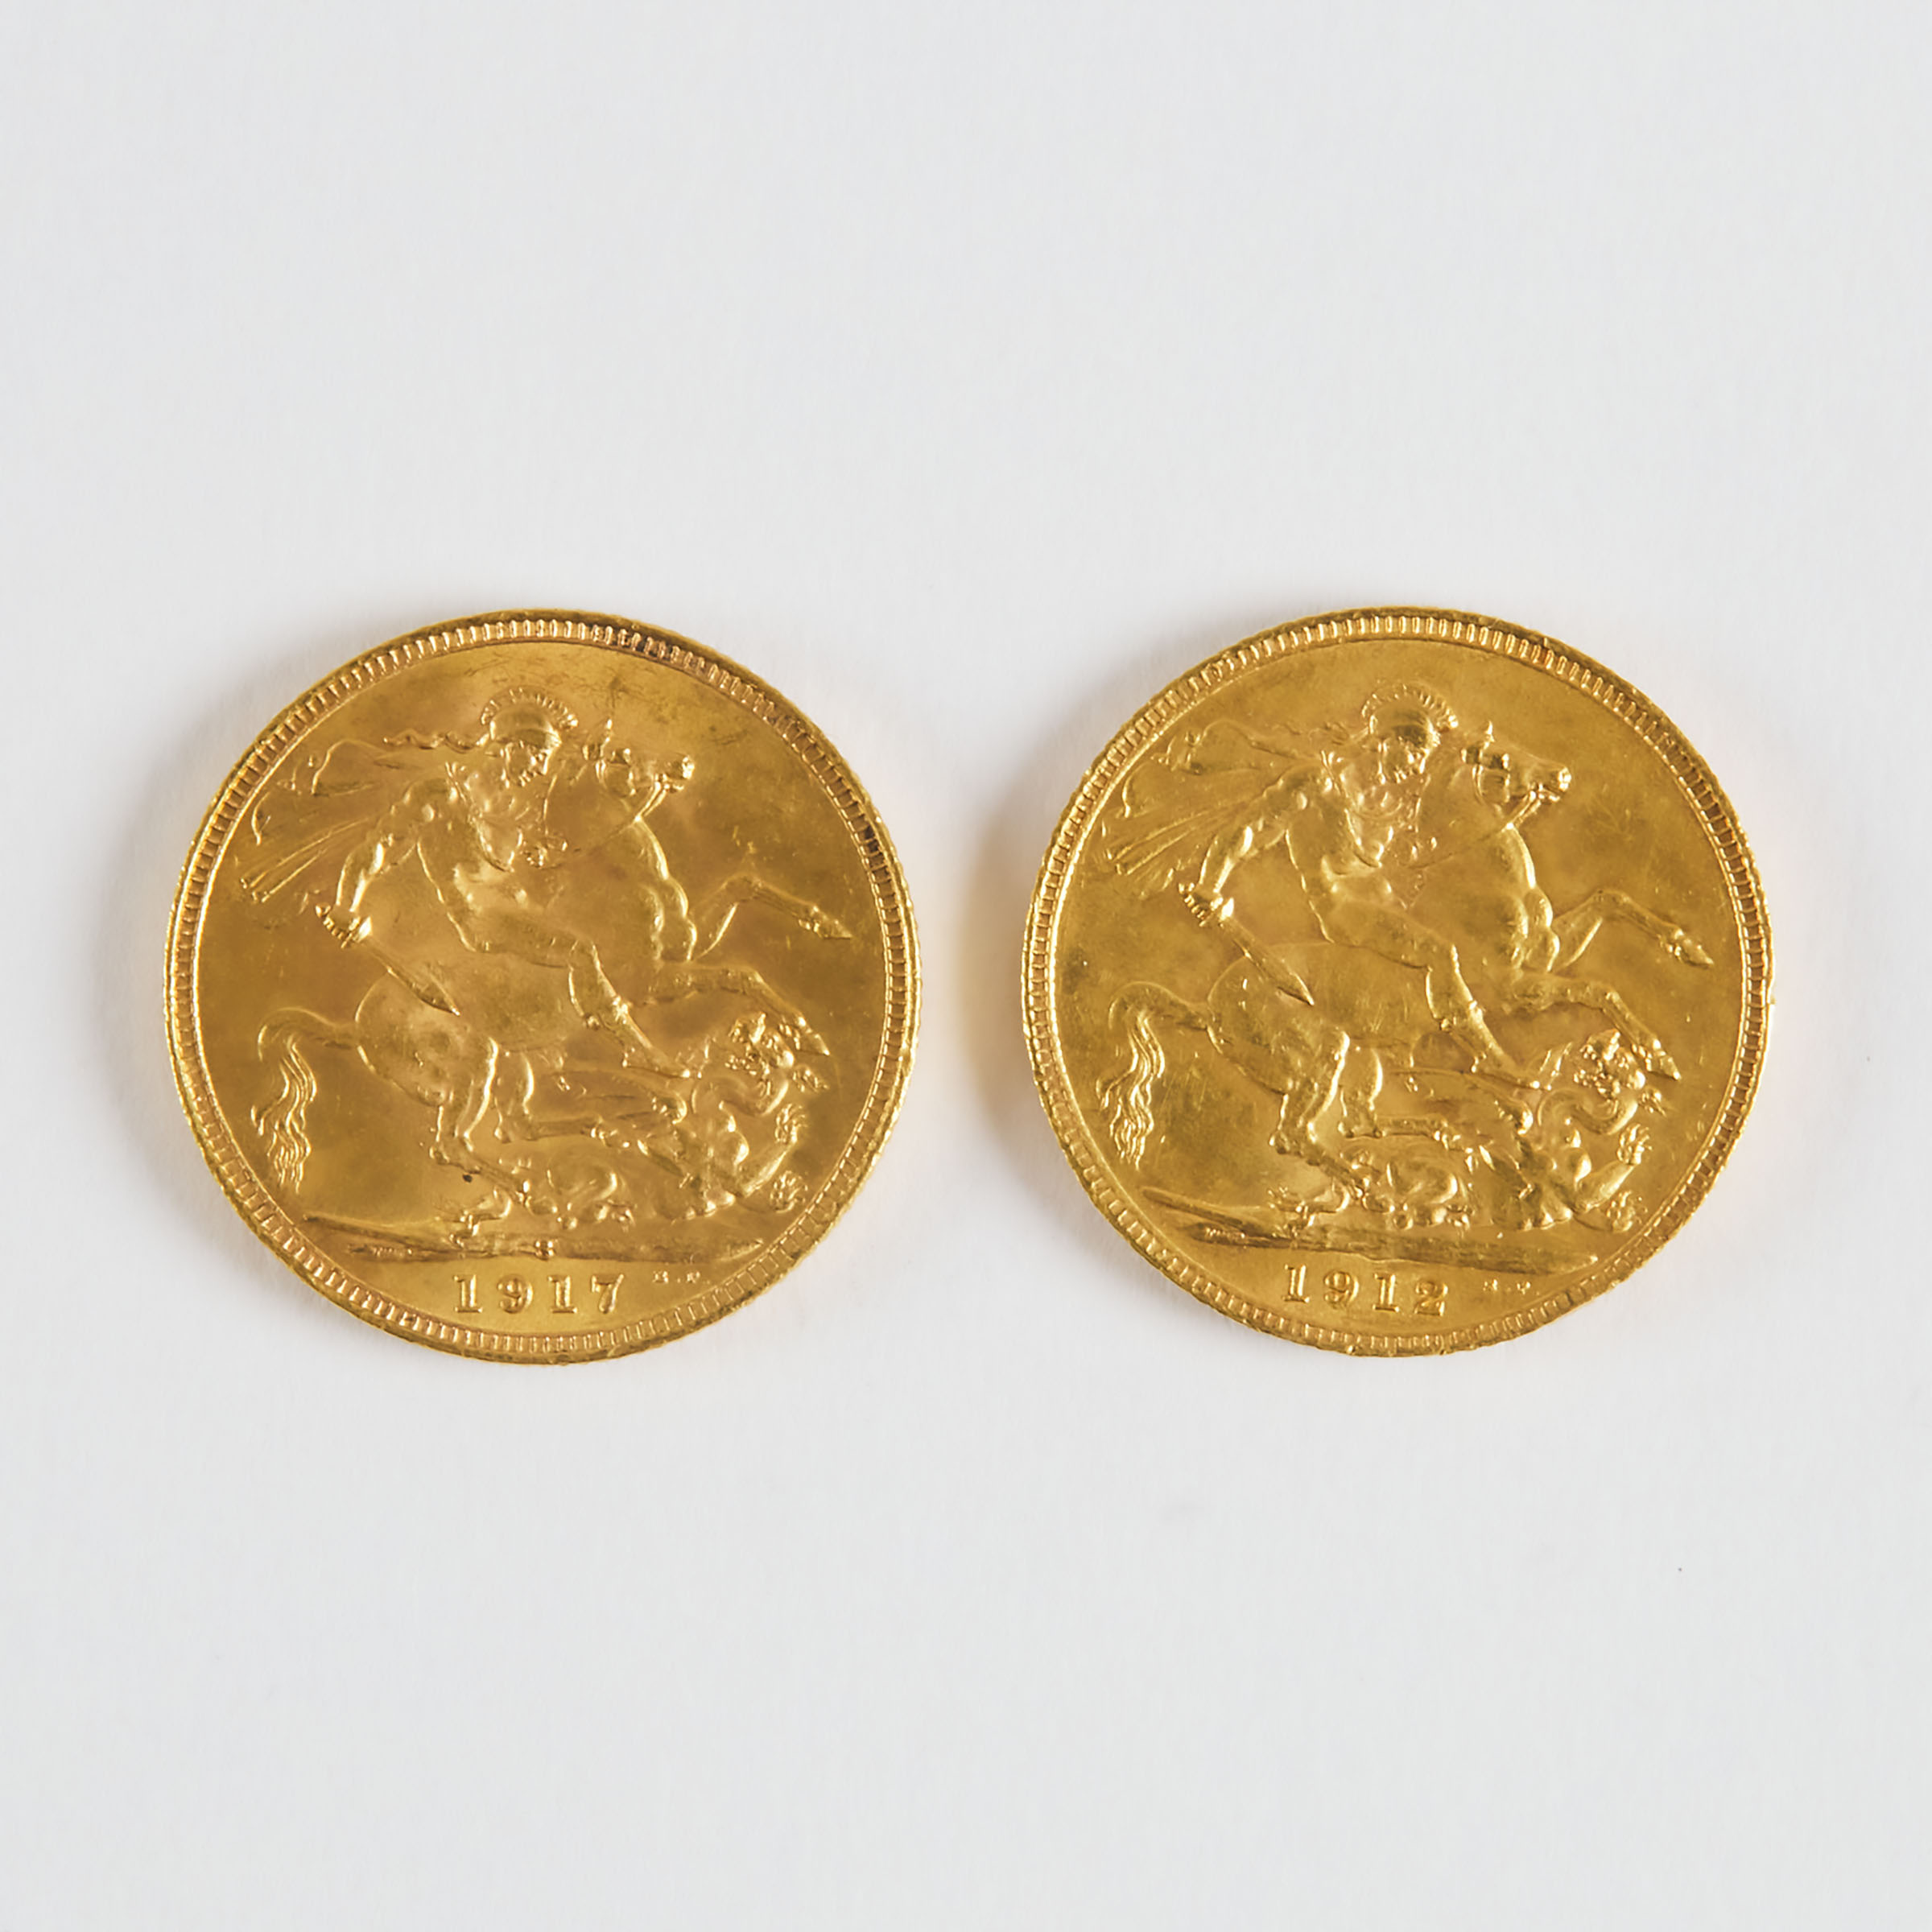 2 x Gold Sovereigns